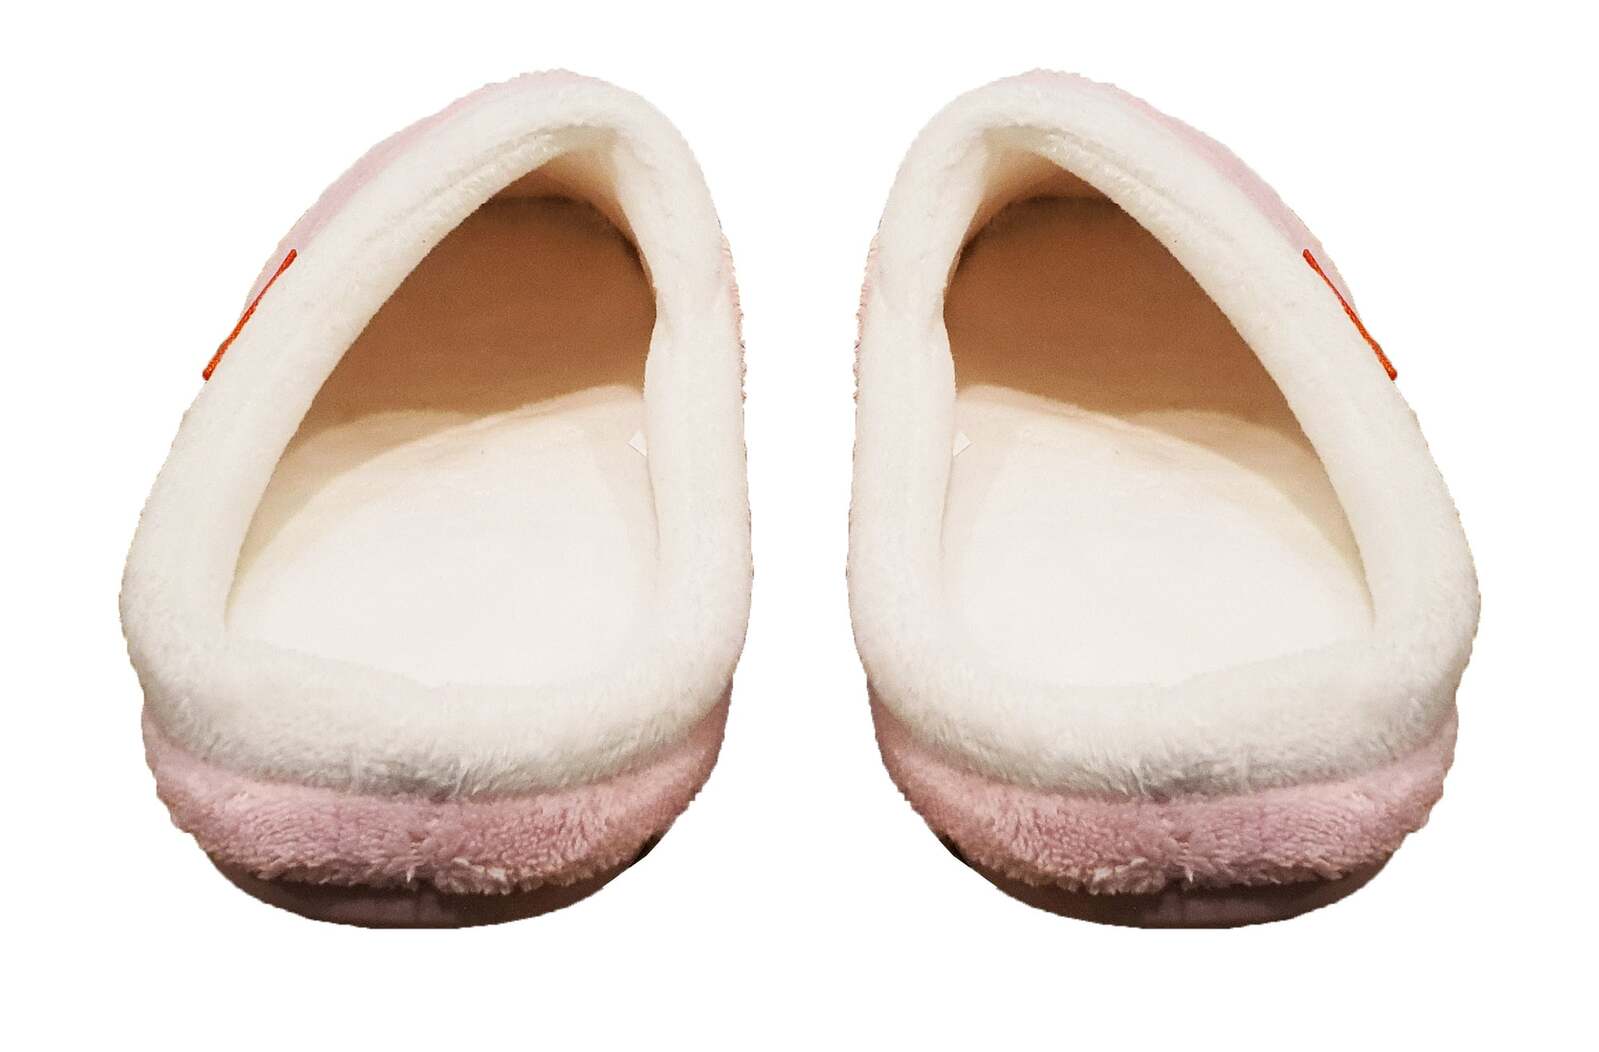 ARCHLINE Orthotic Slippers Slip On Arch Scuffs Pain Relief Moccasins - Pink - EU 39